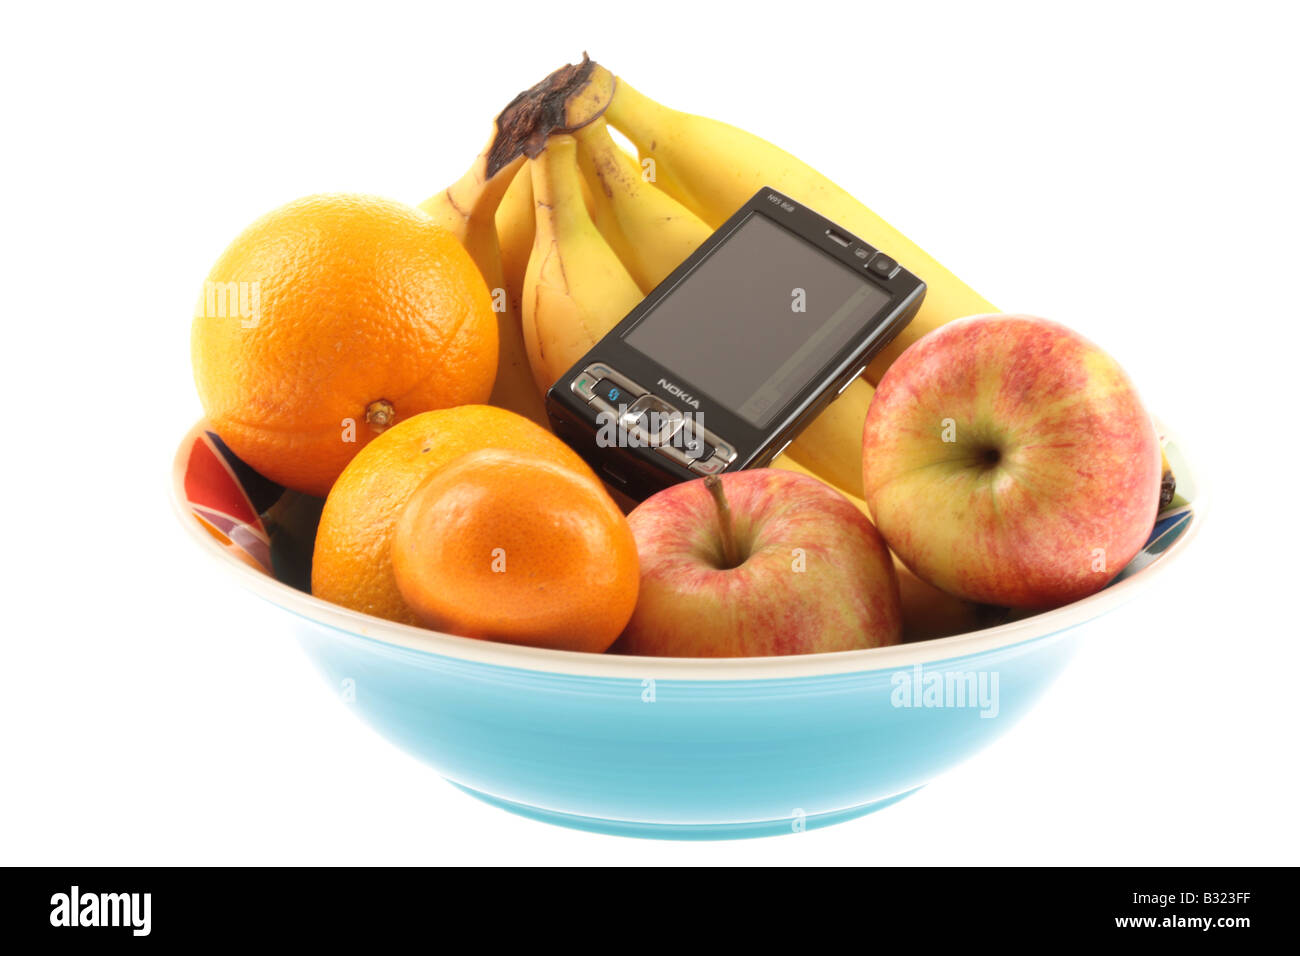 Mobile Phone in a Fruit Bowl Stock Photo